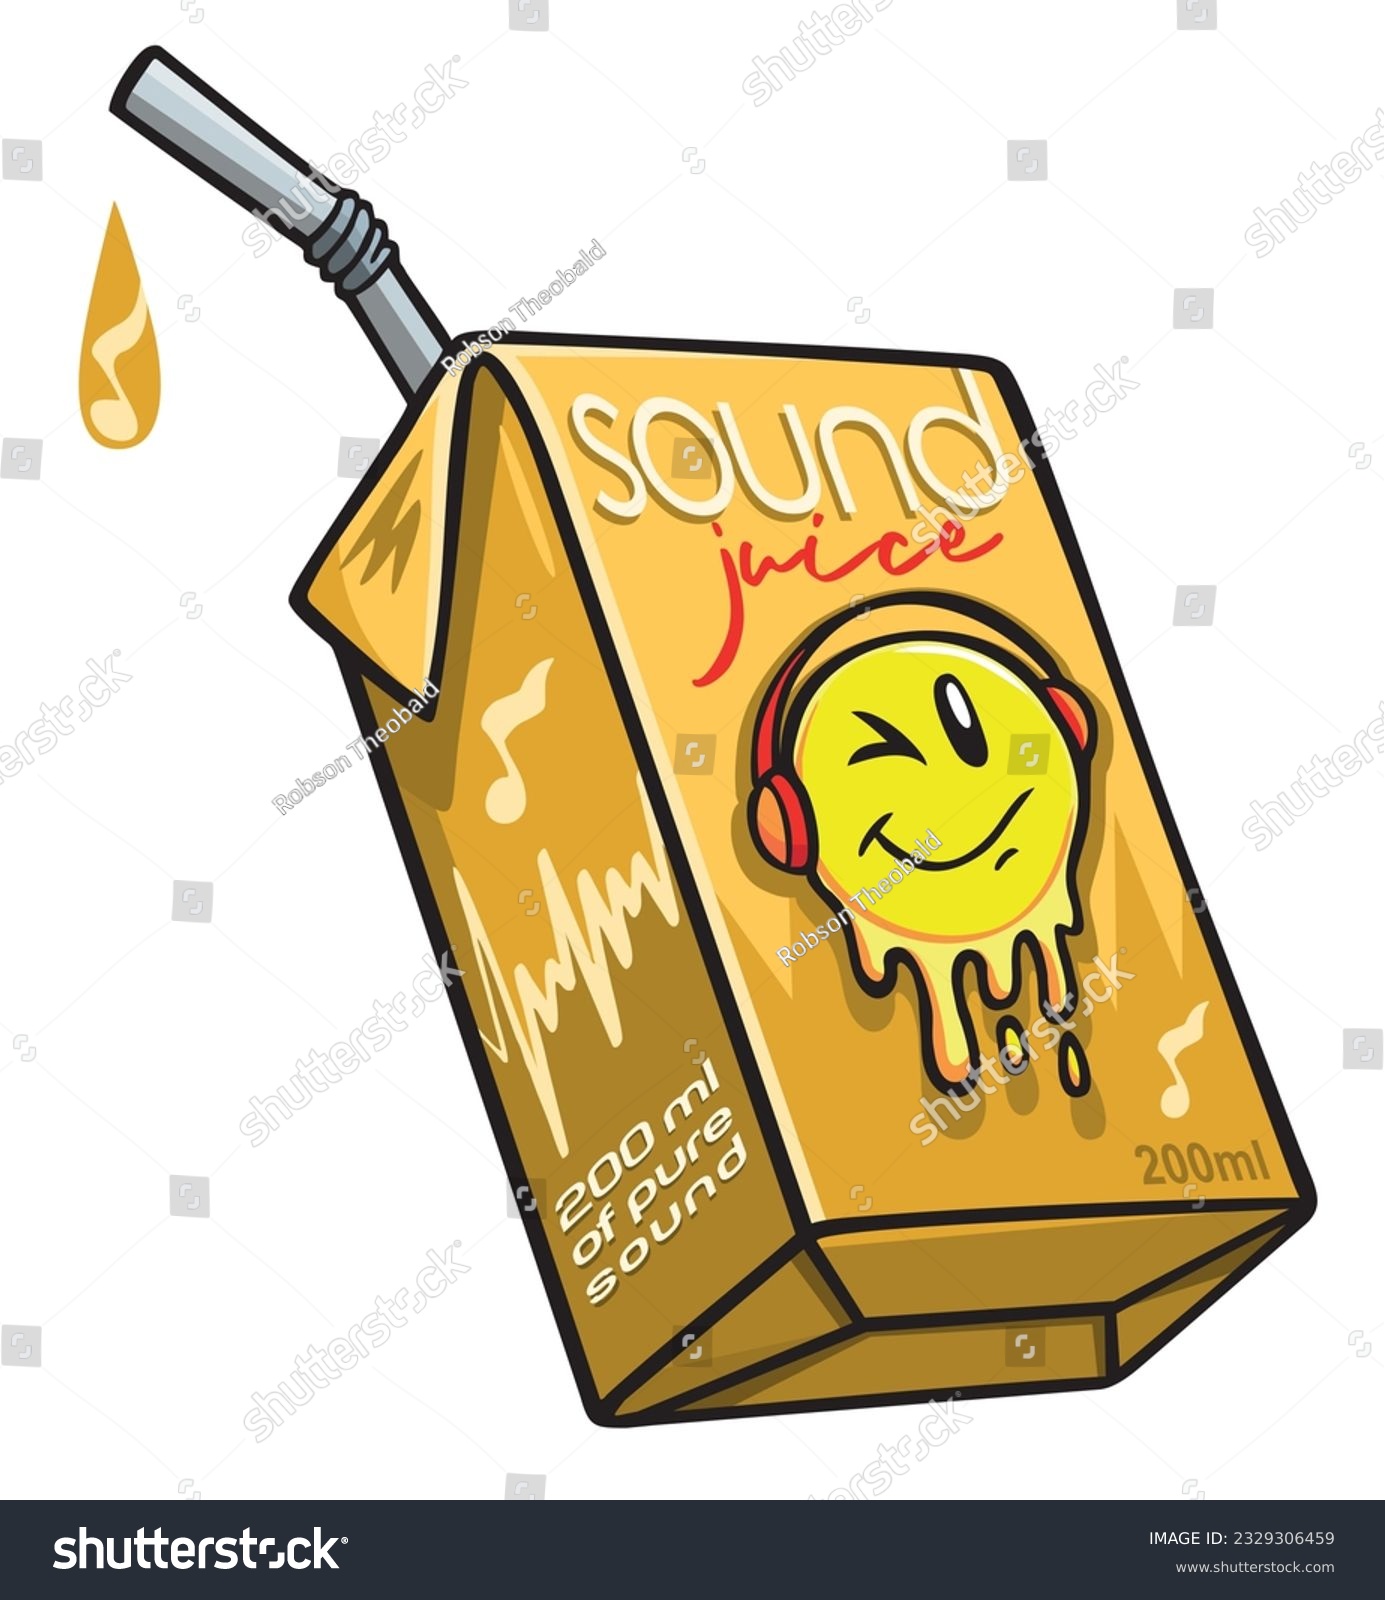 SVG of Vector colorful illustration of music flavor juice box. Artwork in cartoon style. svg